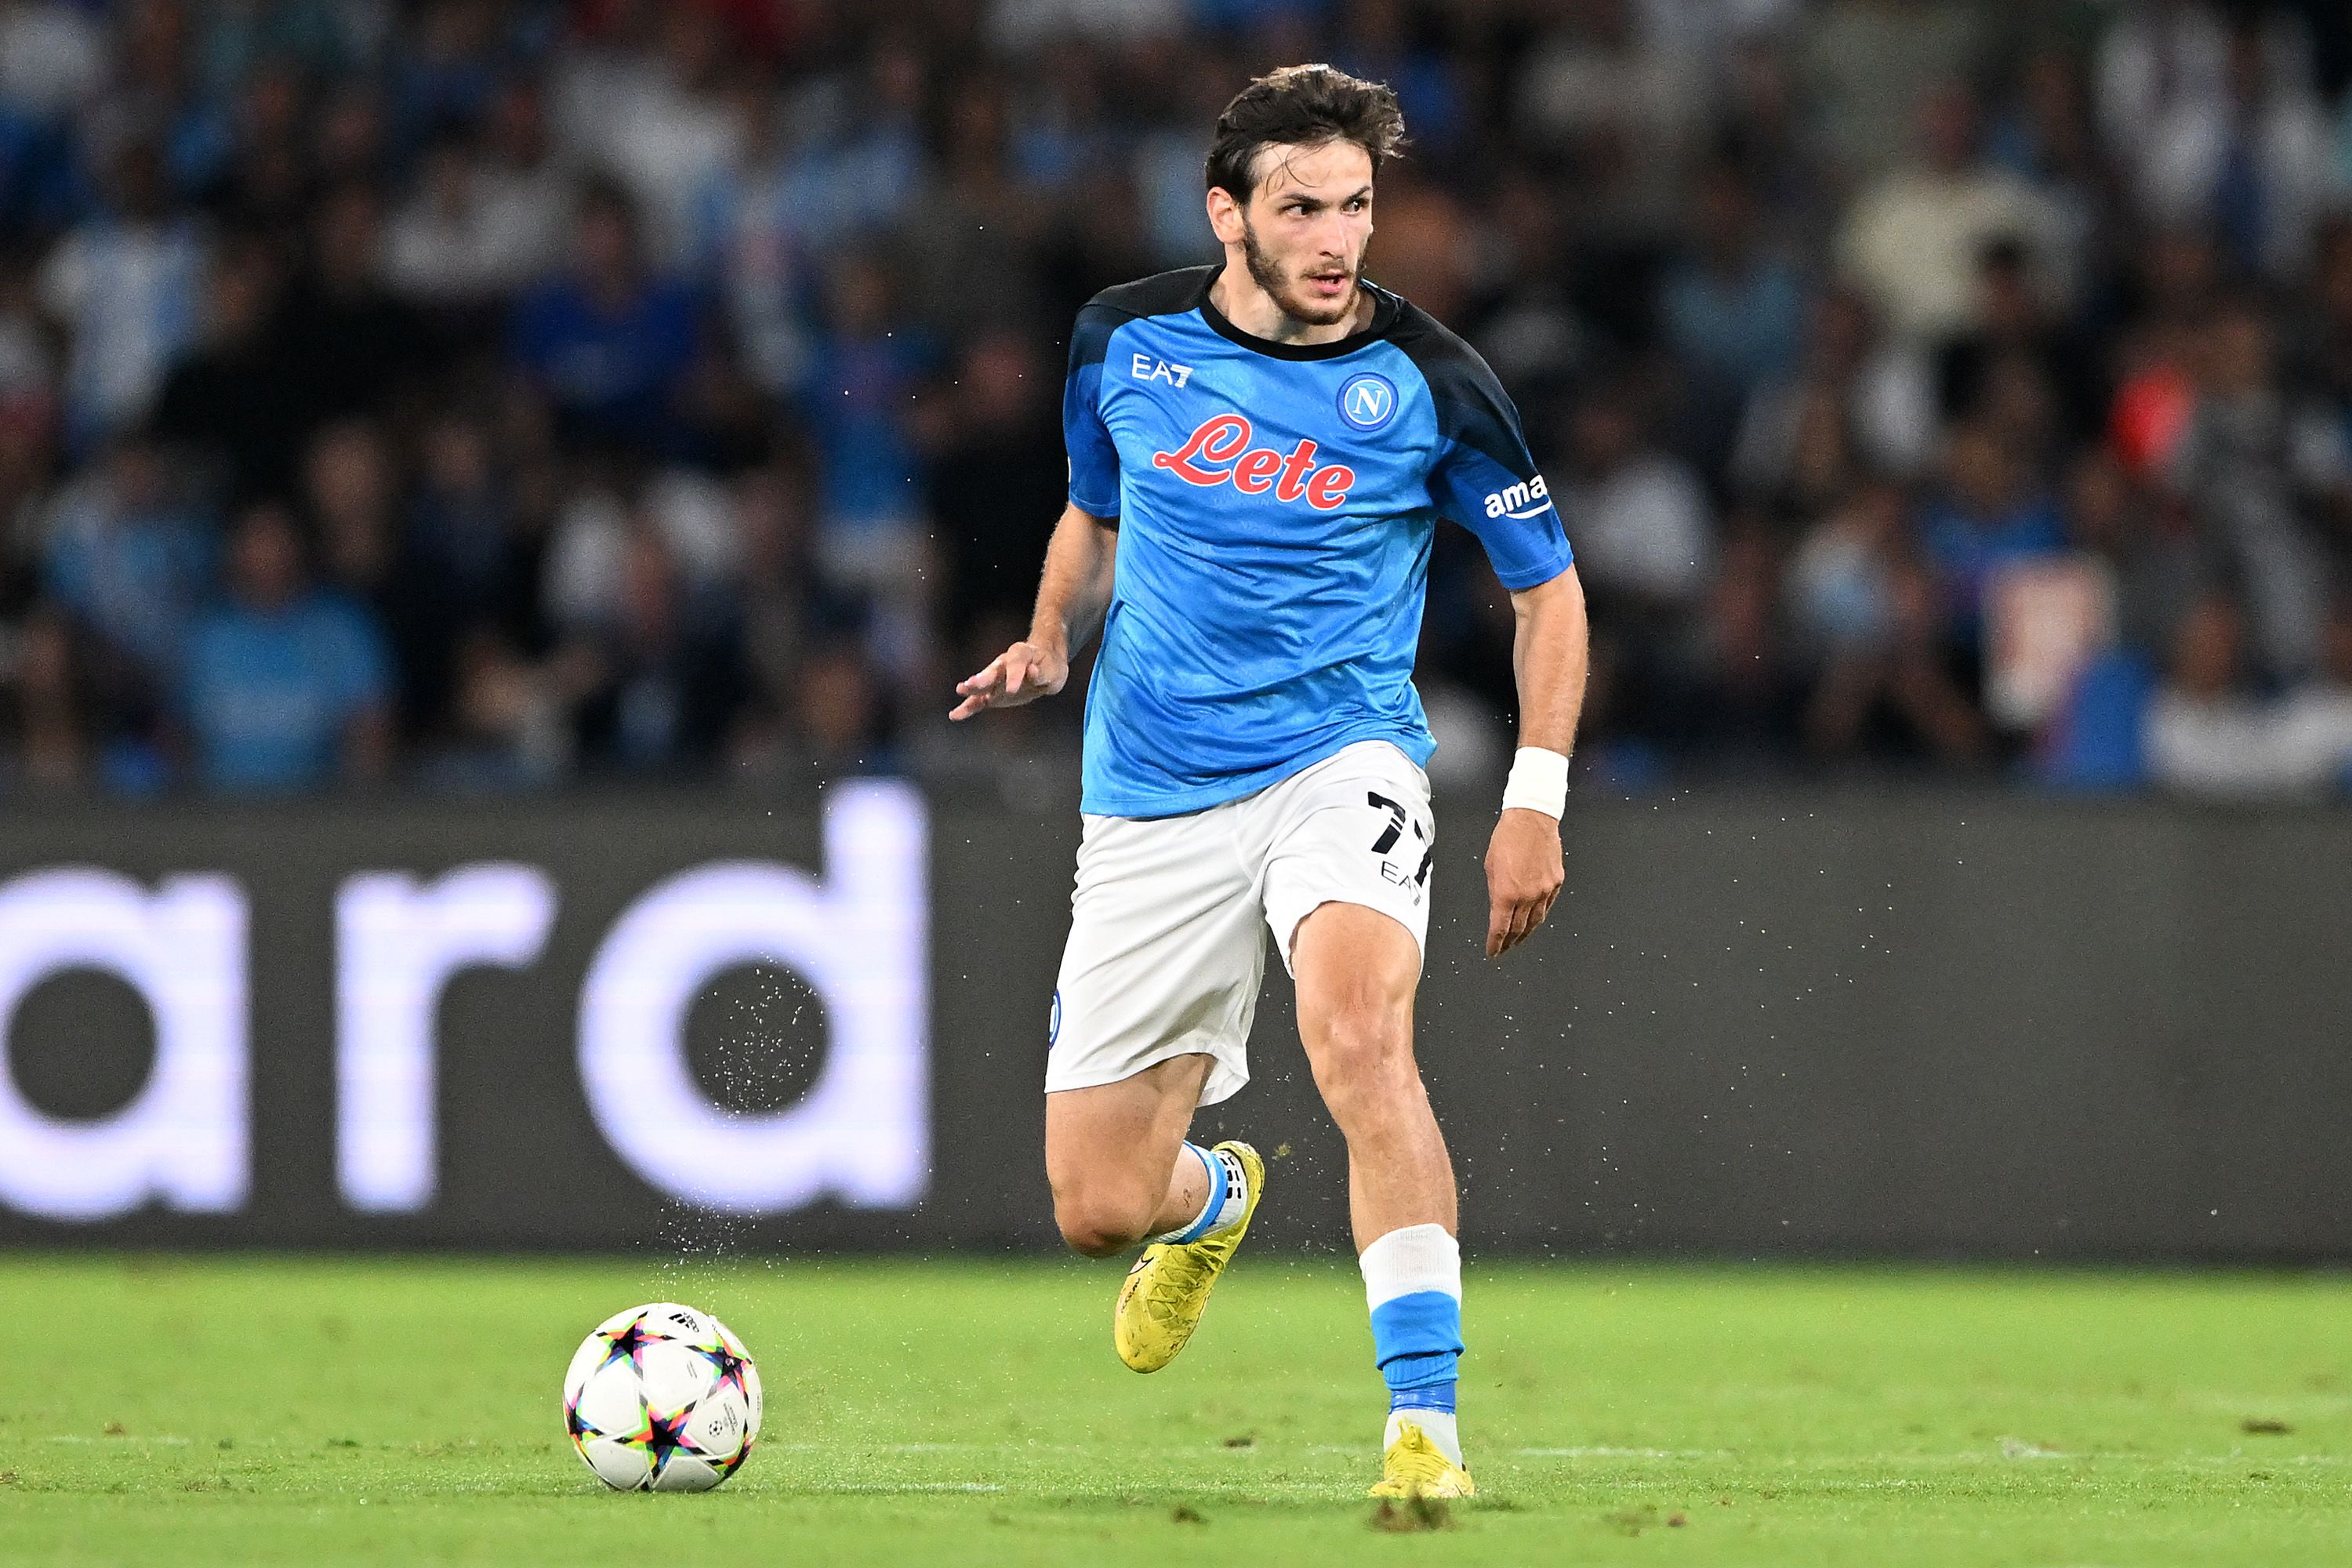 Napoli denies information about signing a new contract with Kvaratskhelia